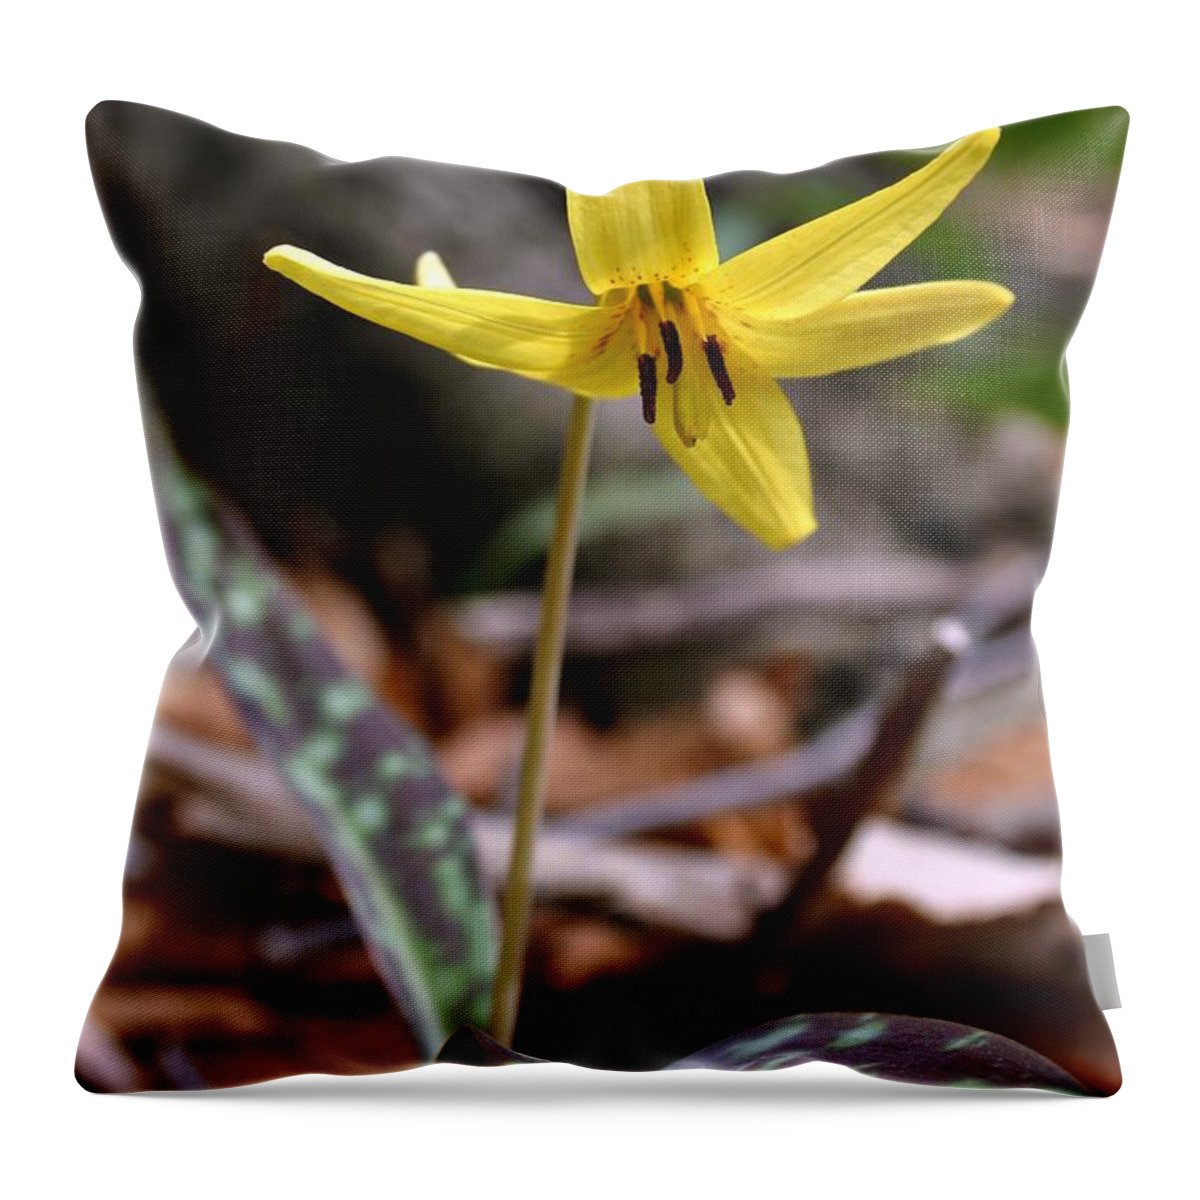 Wildflower Throw Pillow featuring the photograph Trout Lily by Henry Kowalski